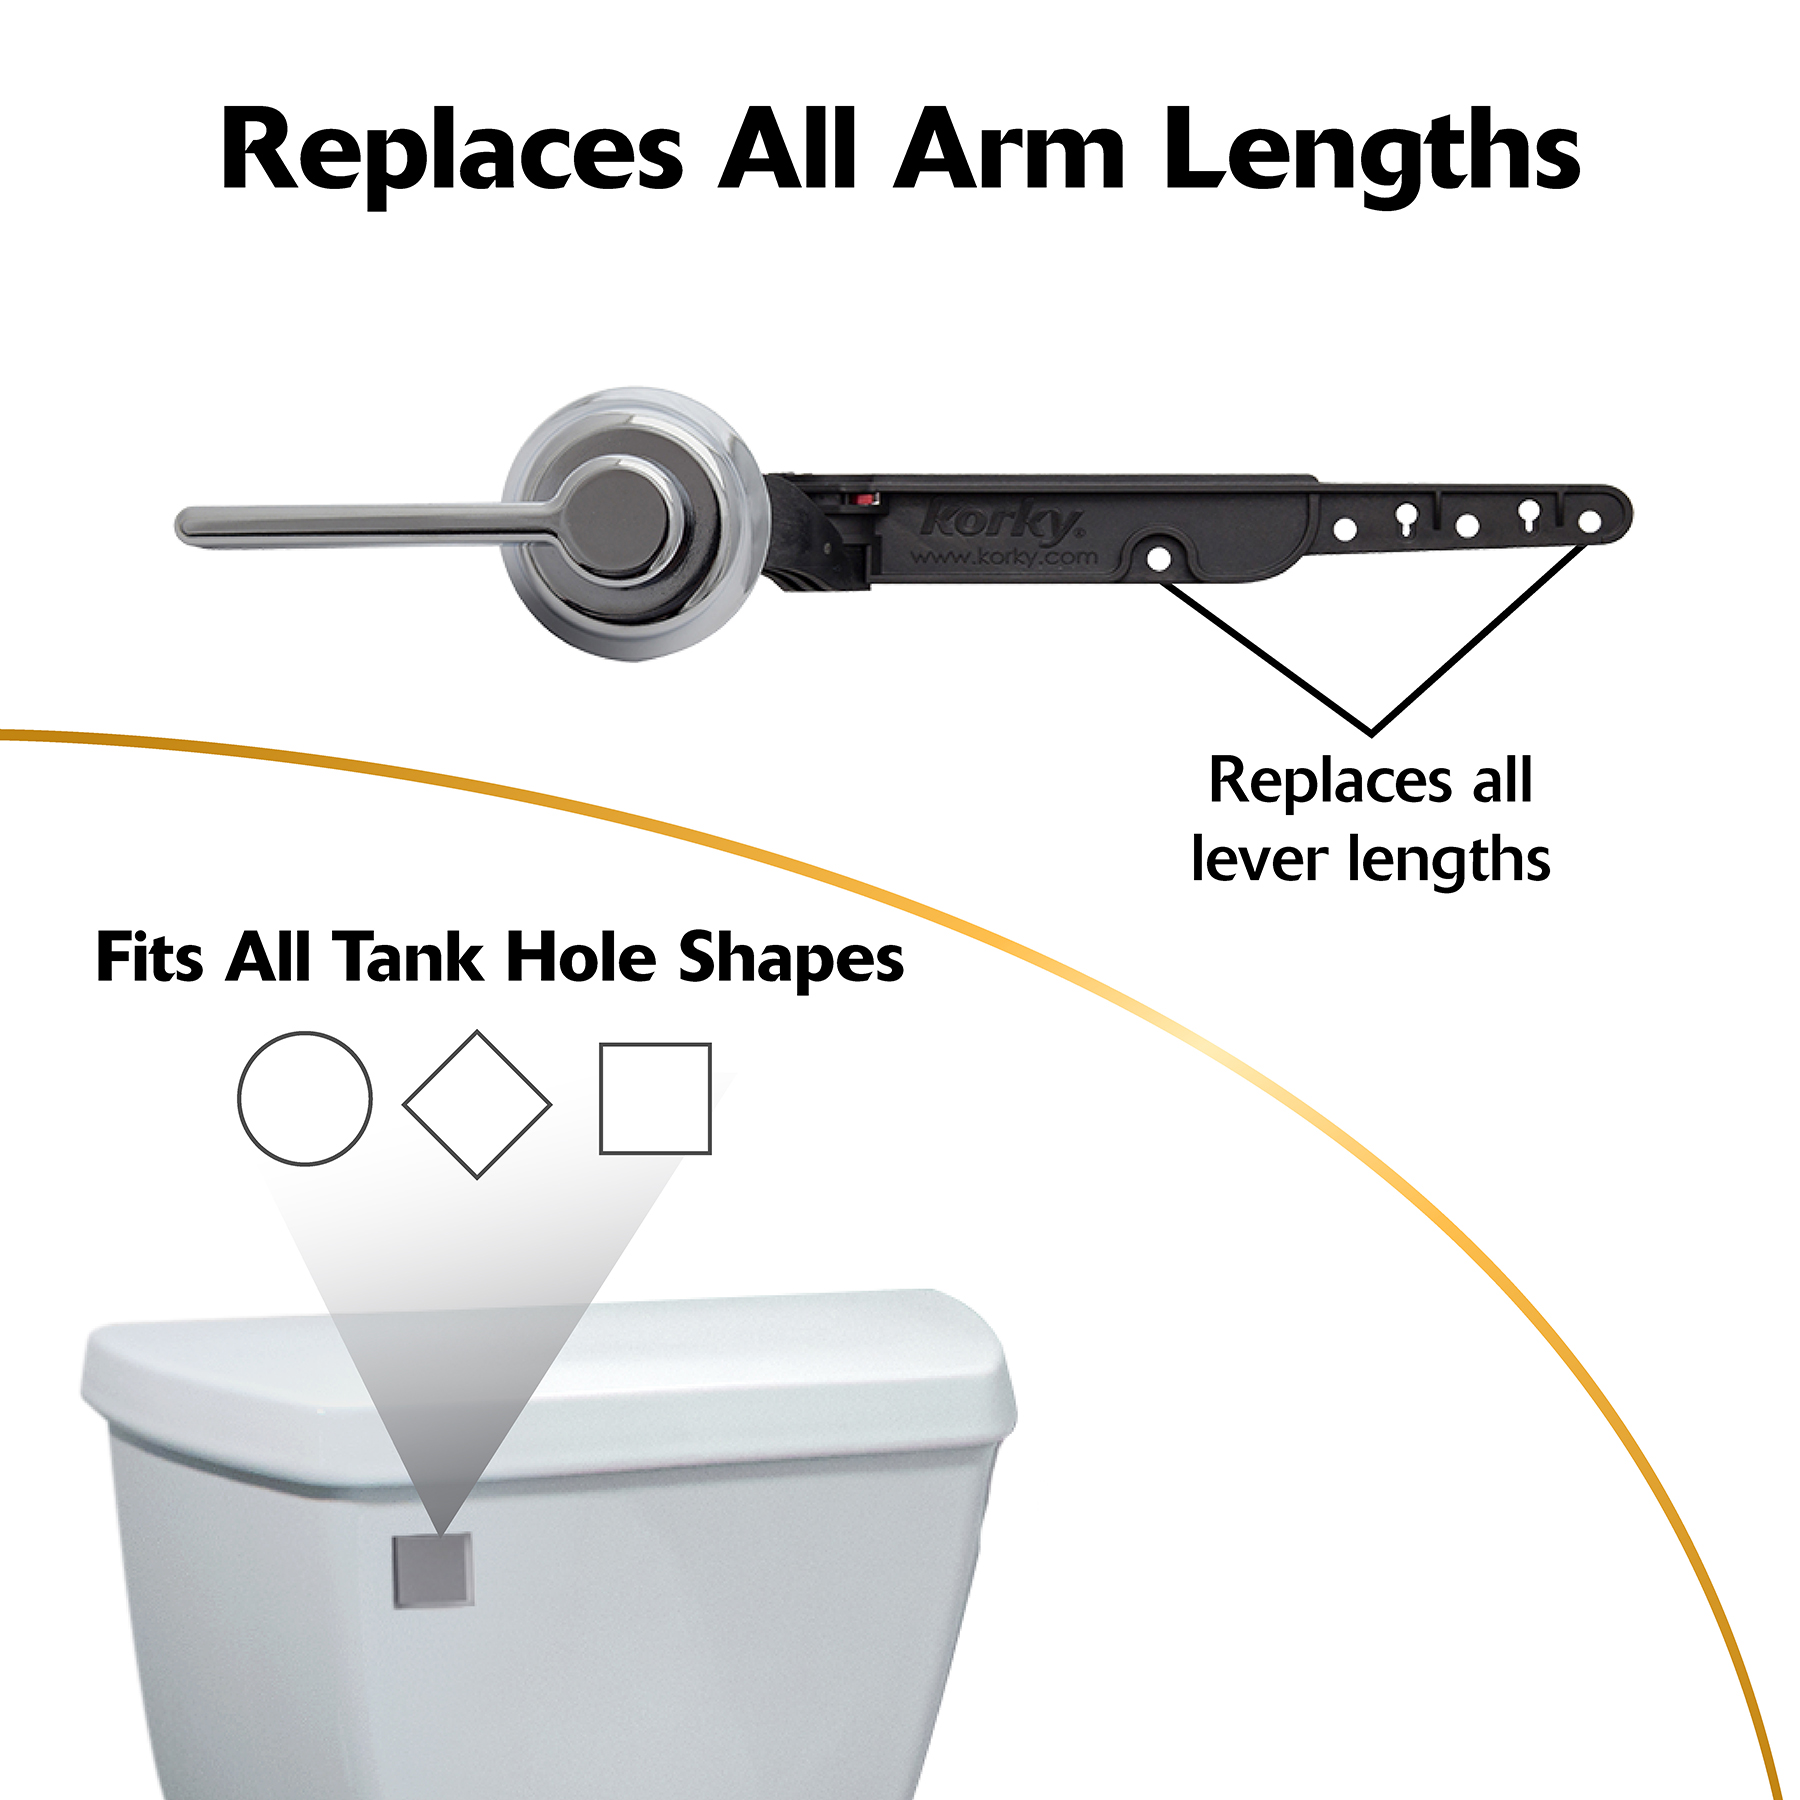 Classic chrome toilet lever replaces all arm lengths and fits all tank hole shapes